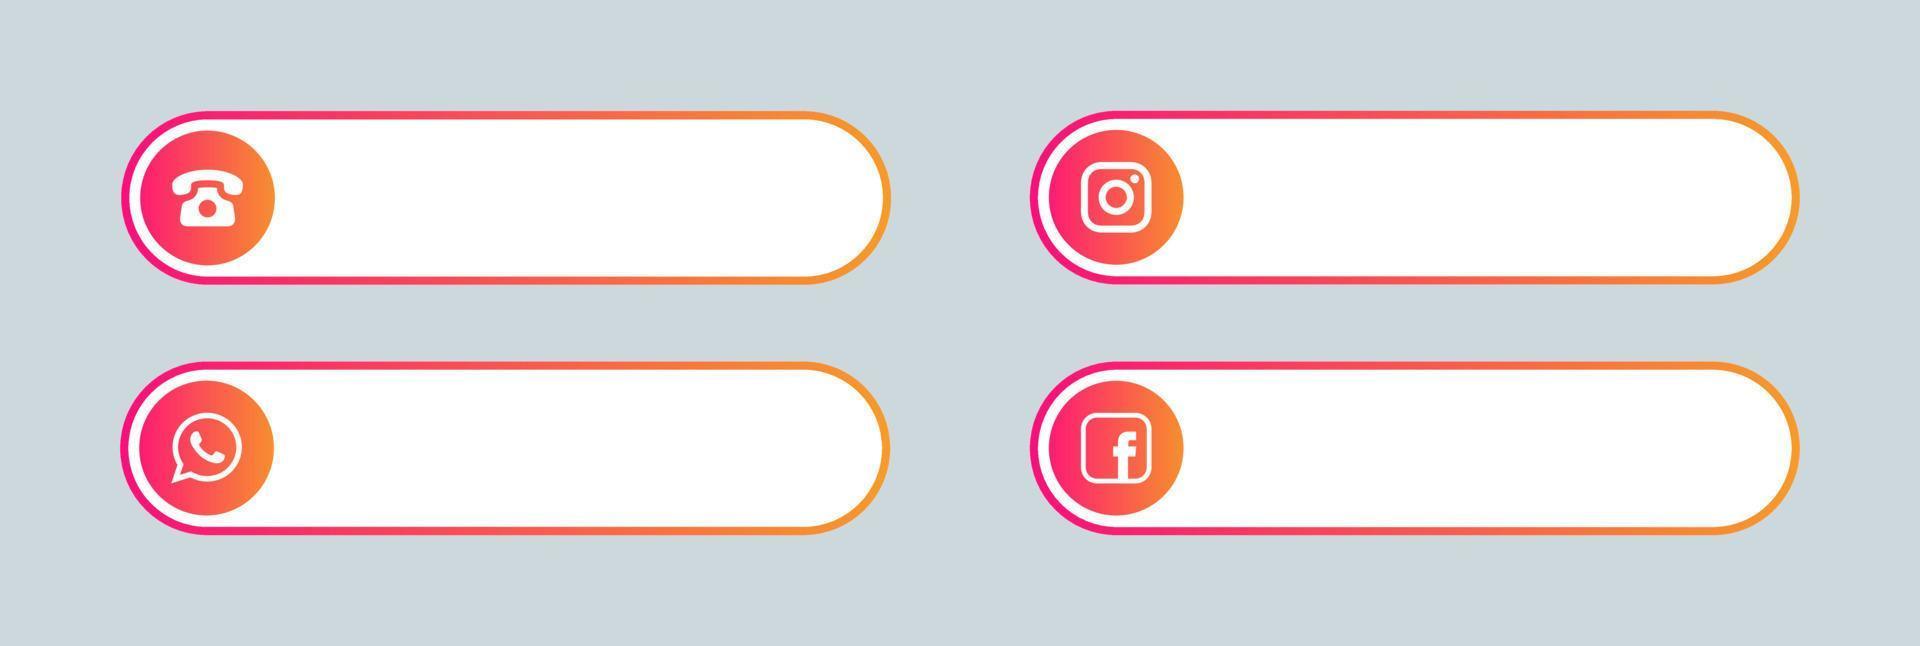 Popular social media and contact lower third icon set. vector